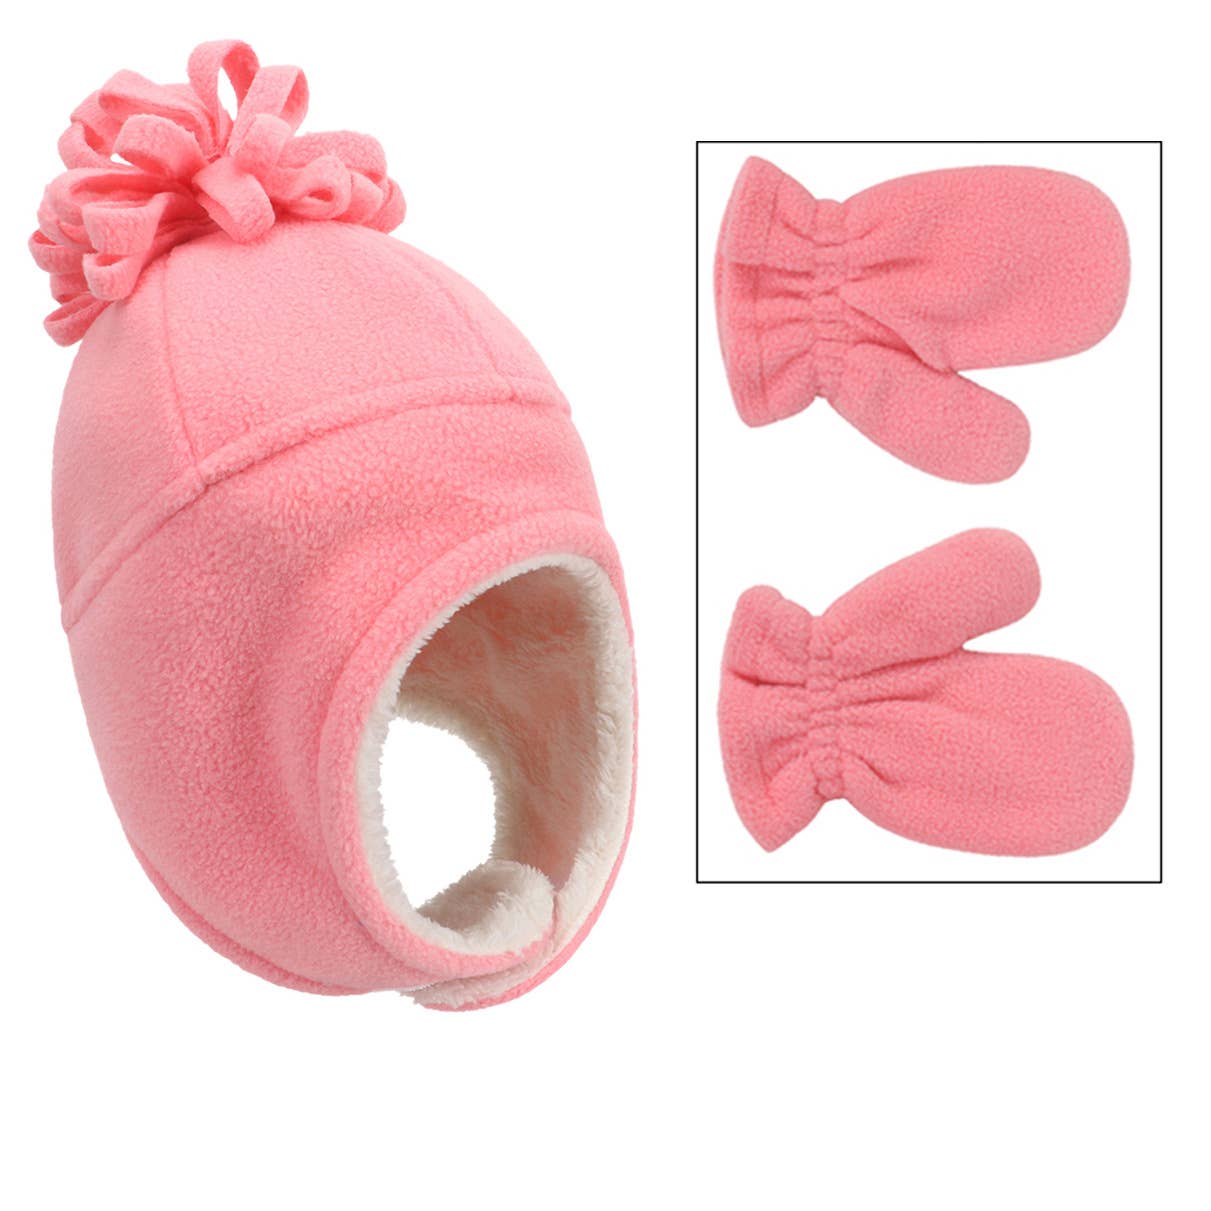 Baby/Toddler Ear Protection Hat & Gloves by Polar Fleece